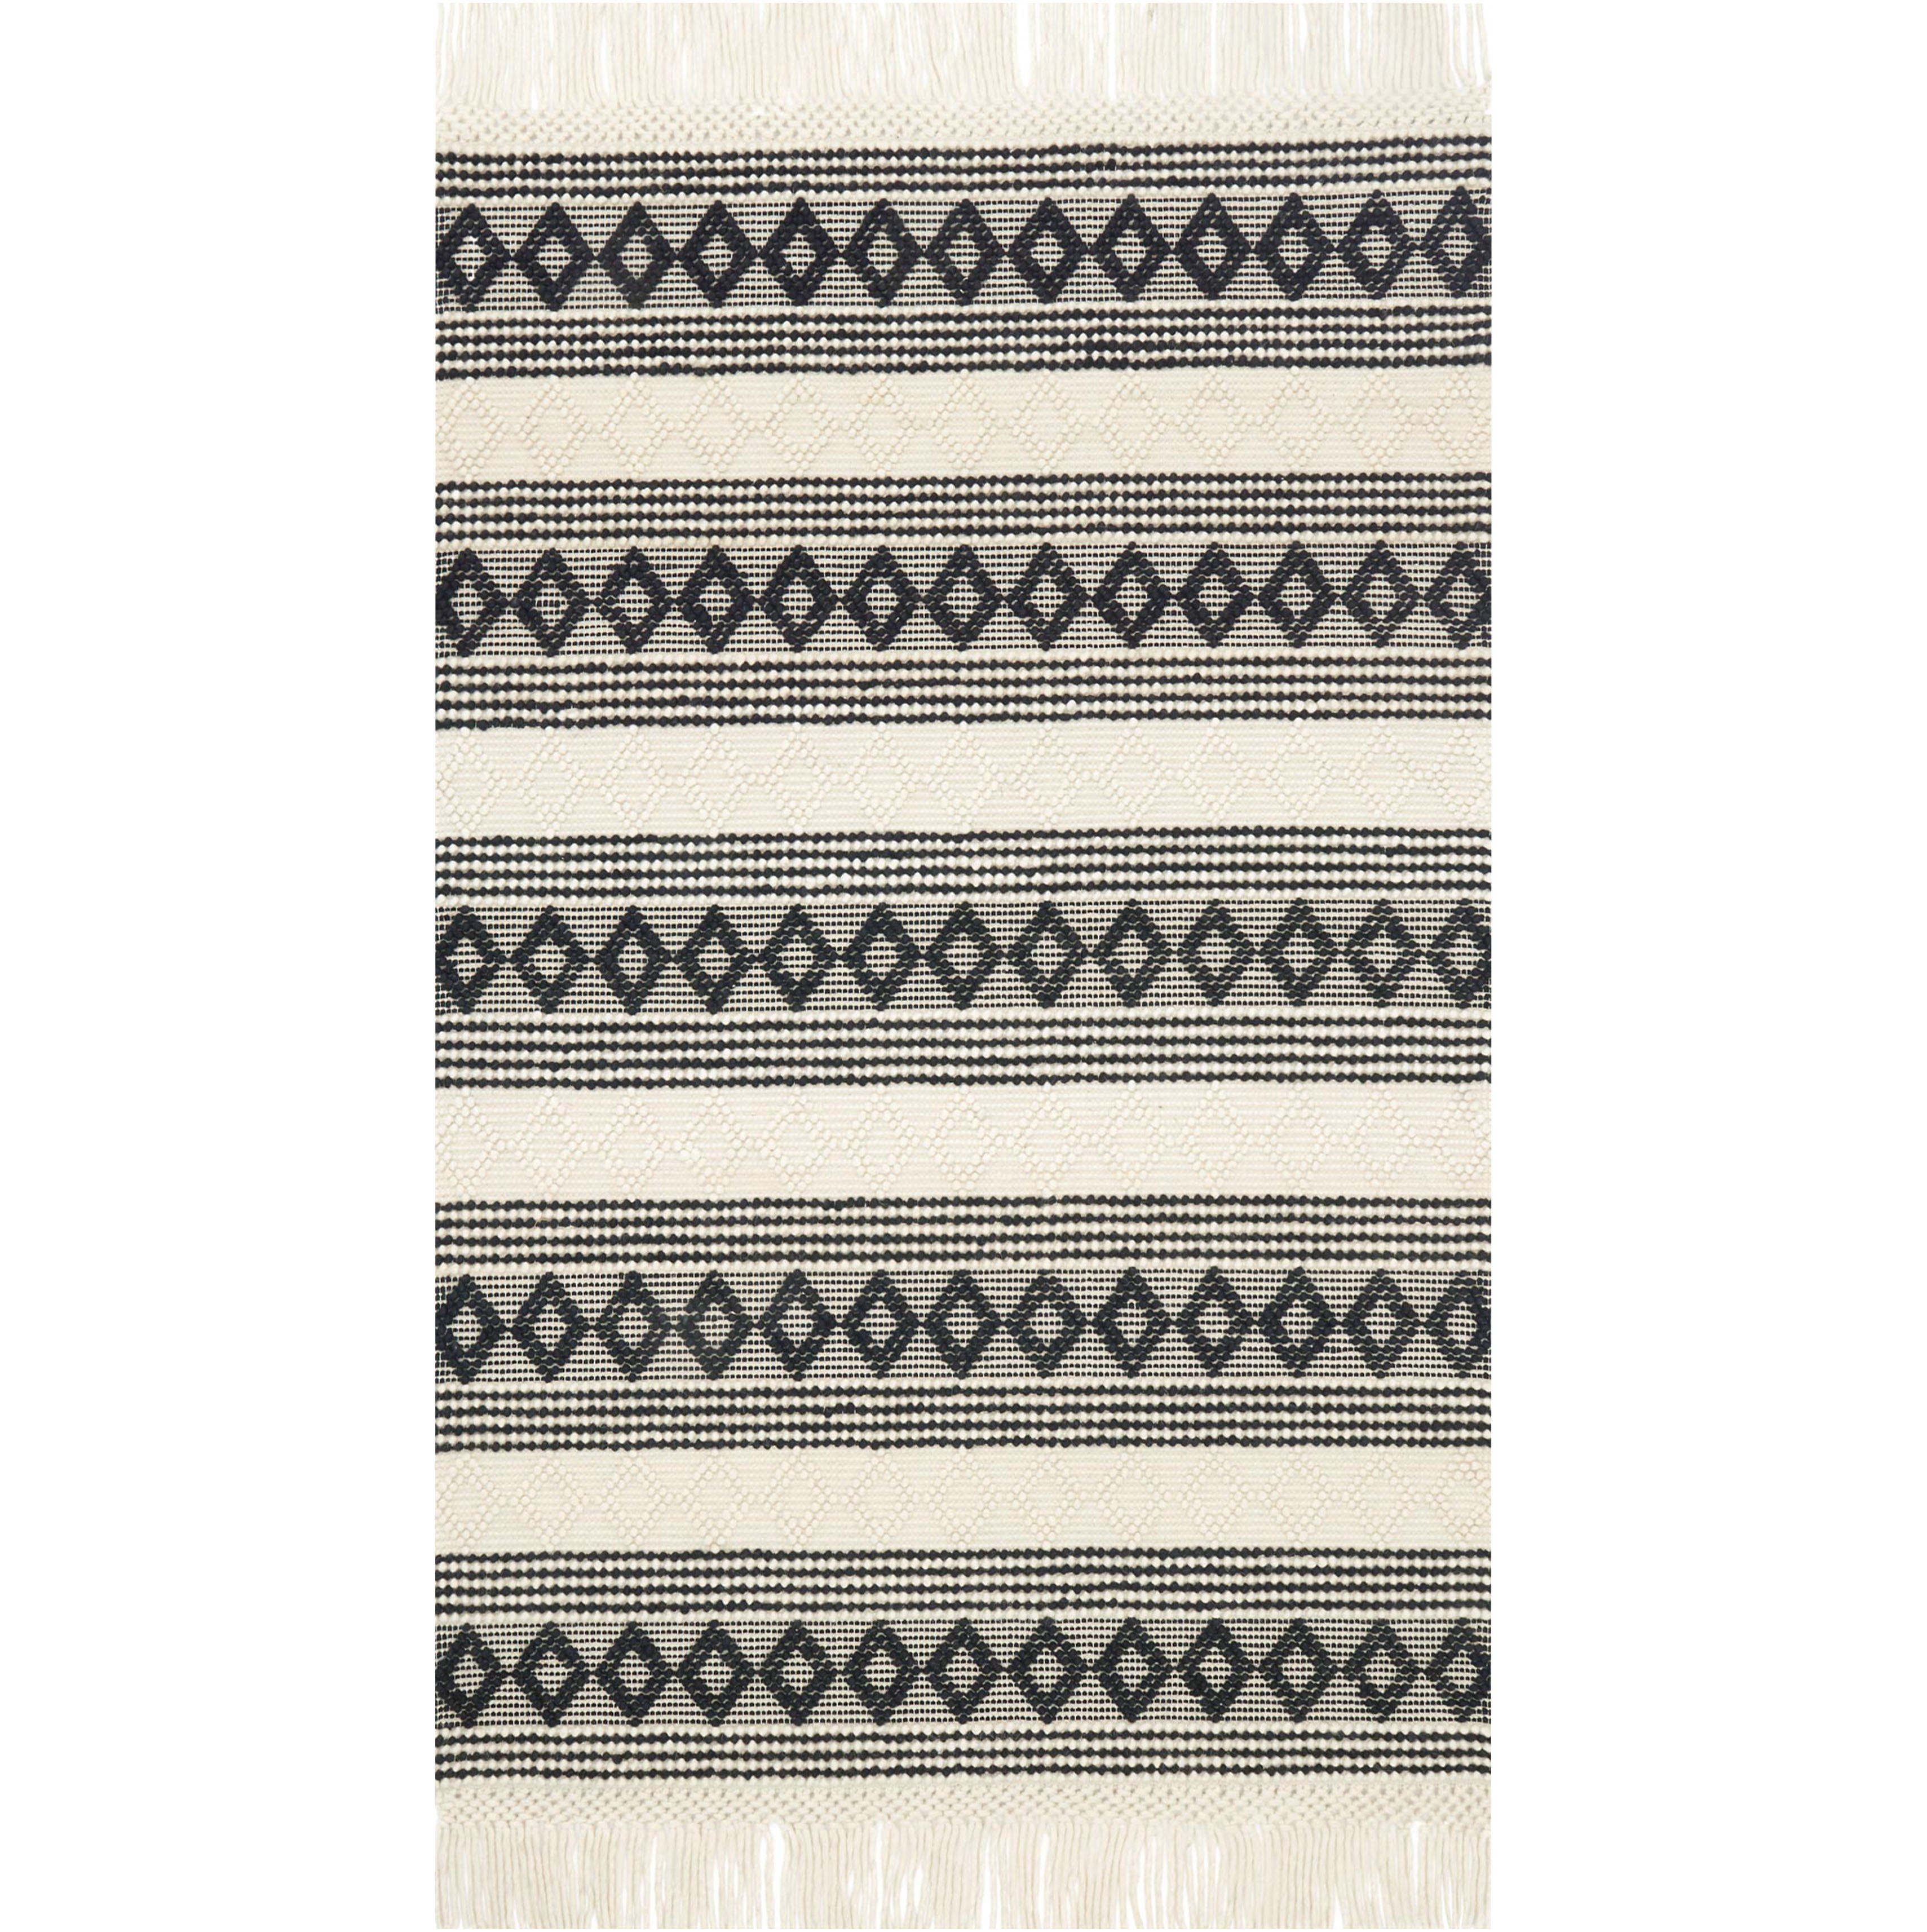 modern black and white diamond pattern rug with white tassels Items range from $159.00 to $1239.00